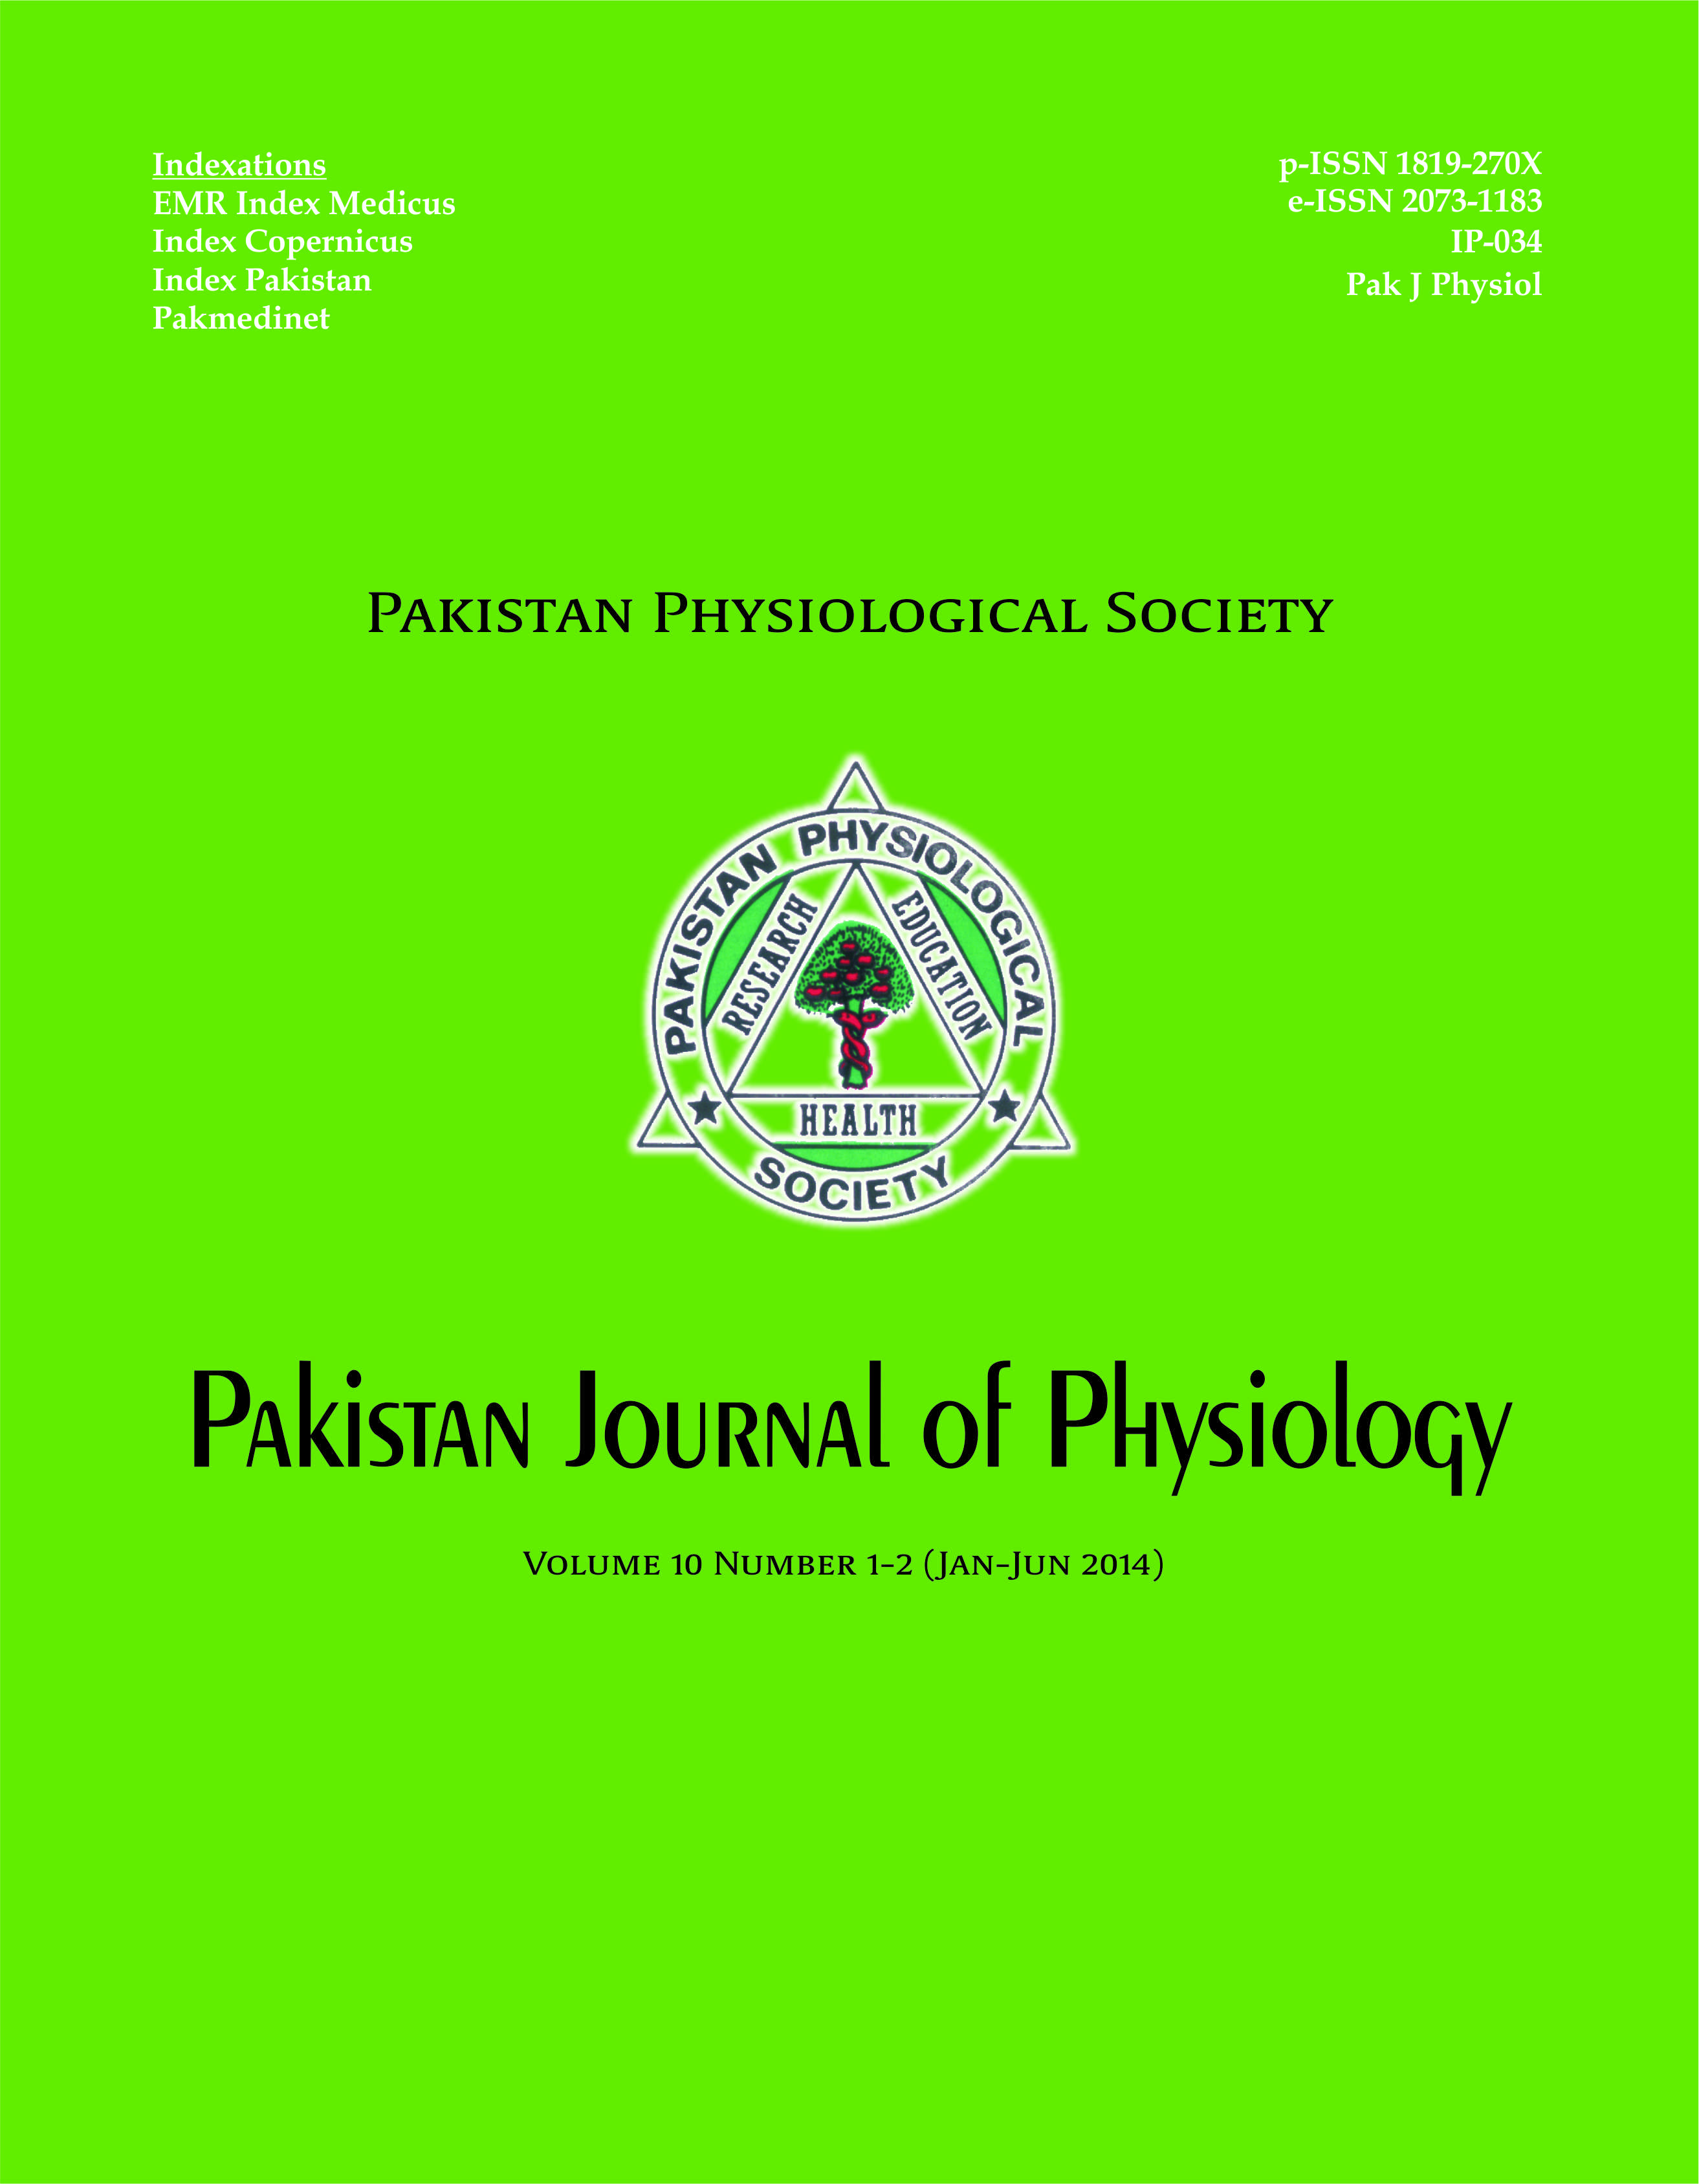 					View Vol. 10 No. 1-2 (2014): Pakistan Journal of Physiology
				